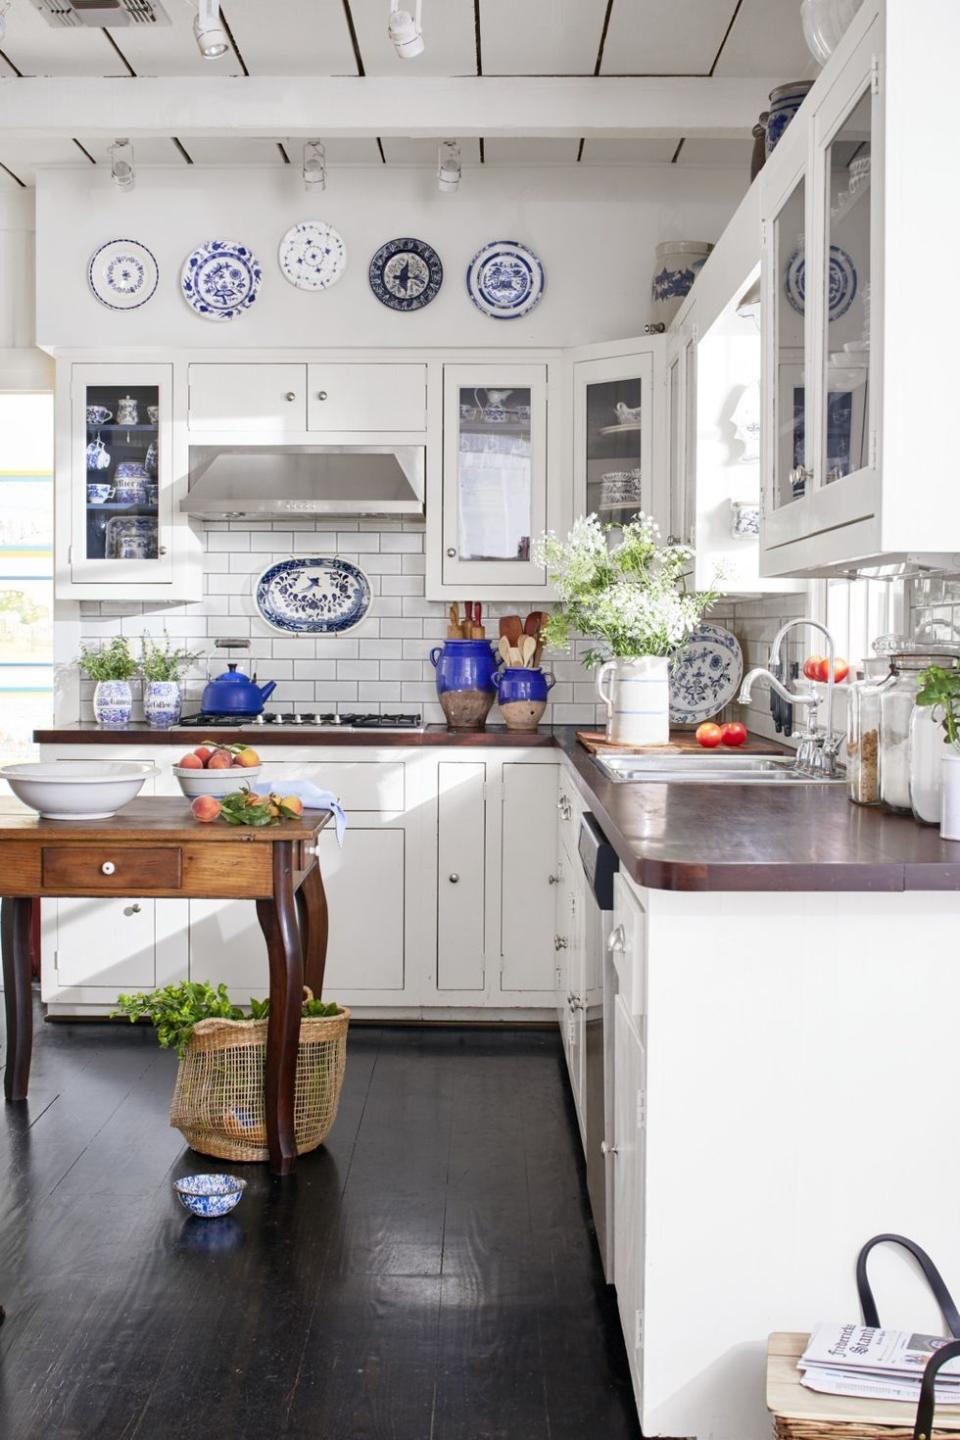 These Gorgeous, Airy White Kitchens Will Inspire Your Next Remodel